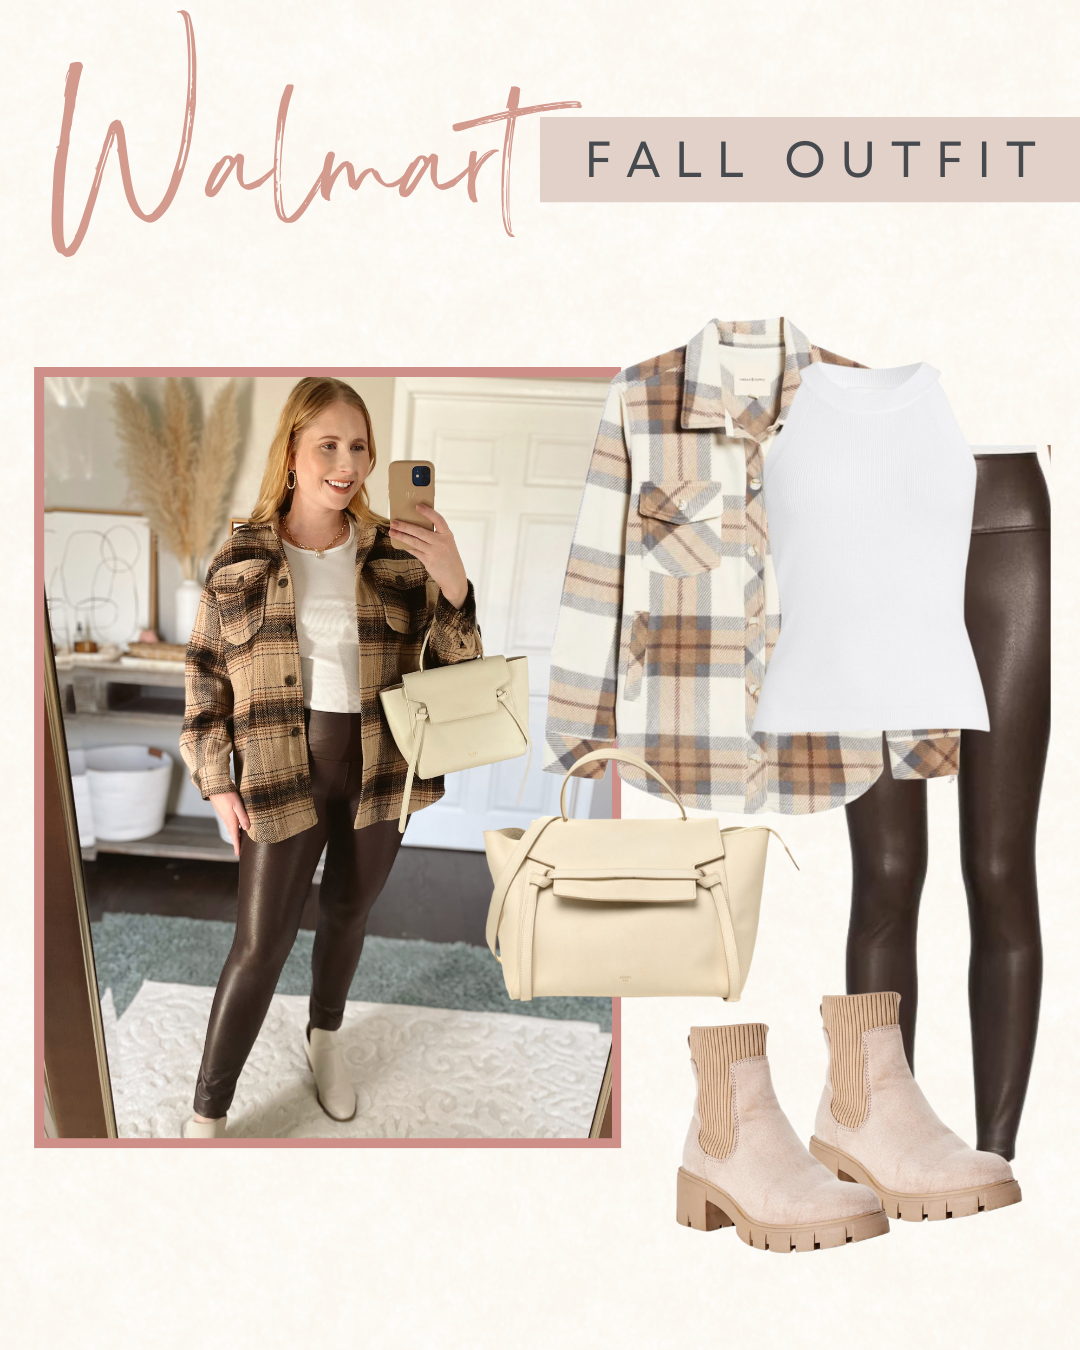 Style Tips On How To Wear Puffer Vests This Fall  Plaid shirt outfits,  Fall outfits, Womens fashion